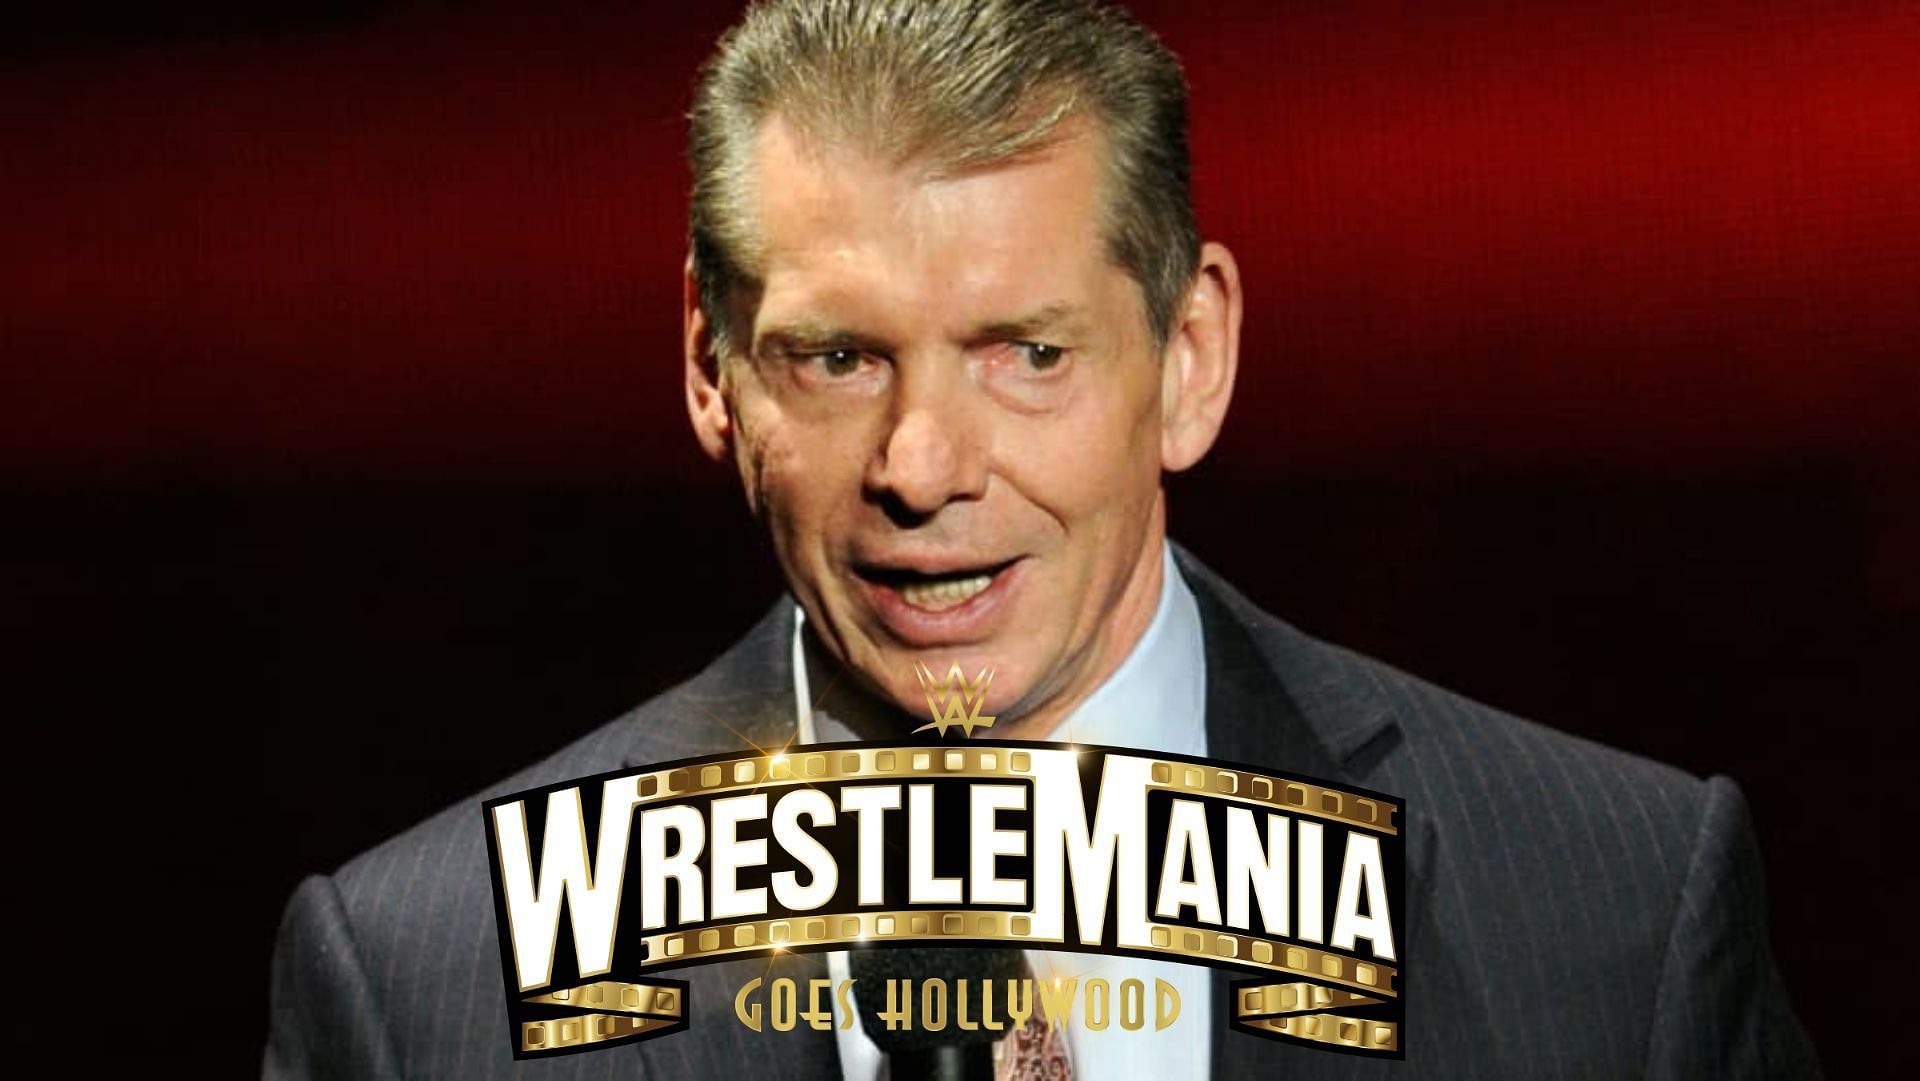 Vince McMahon has made his return to WWE